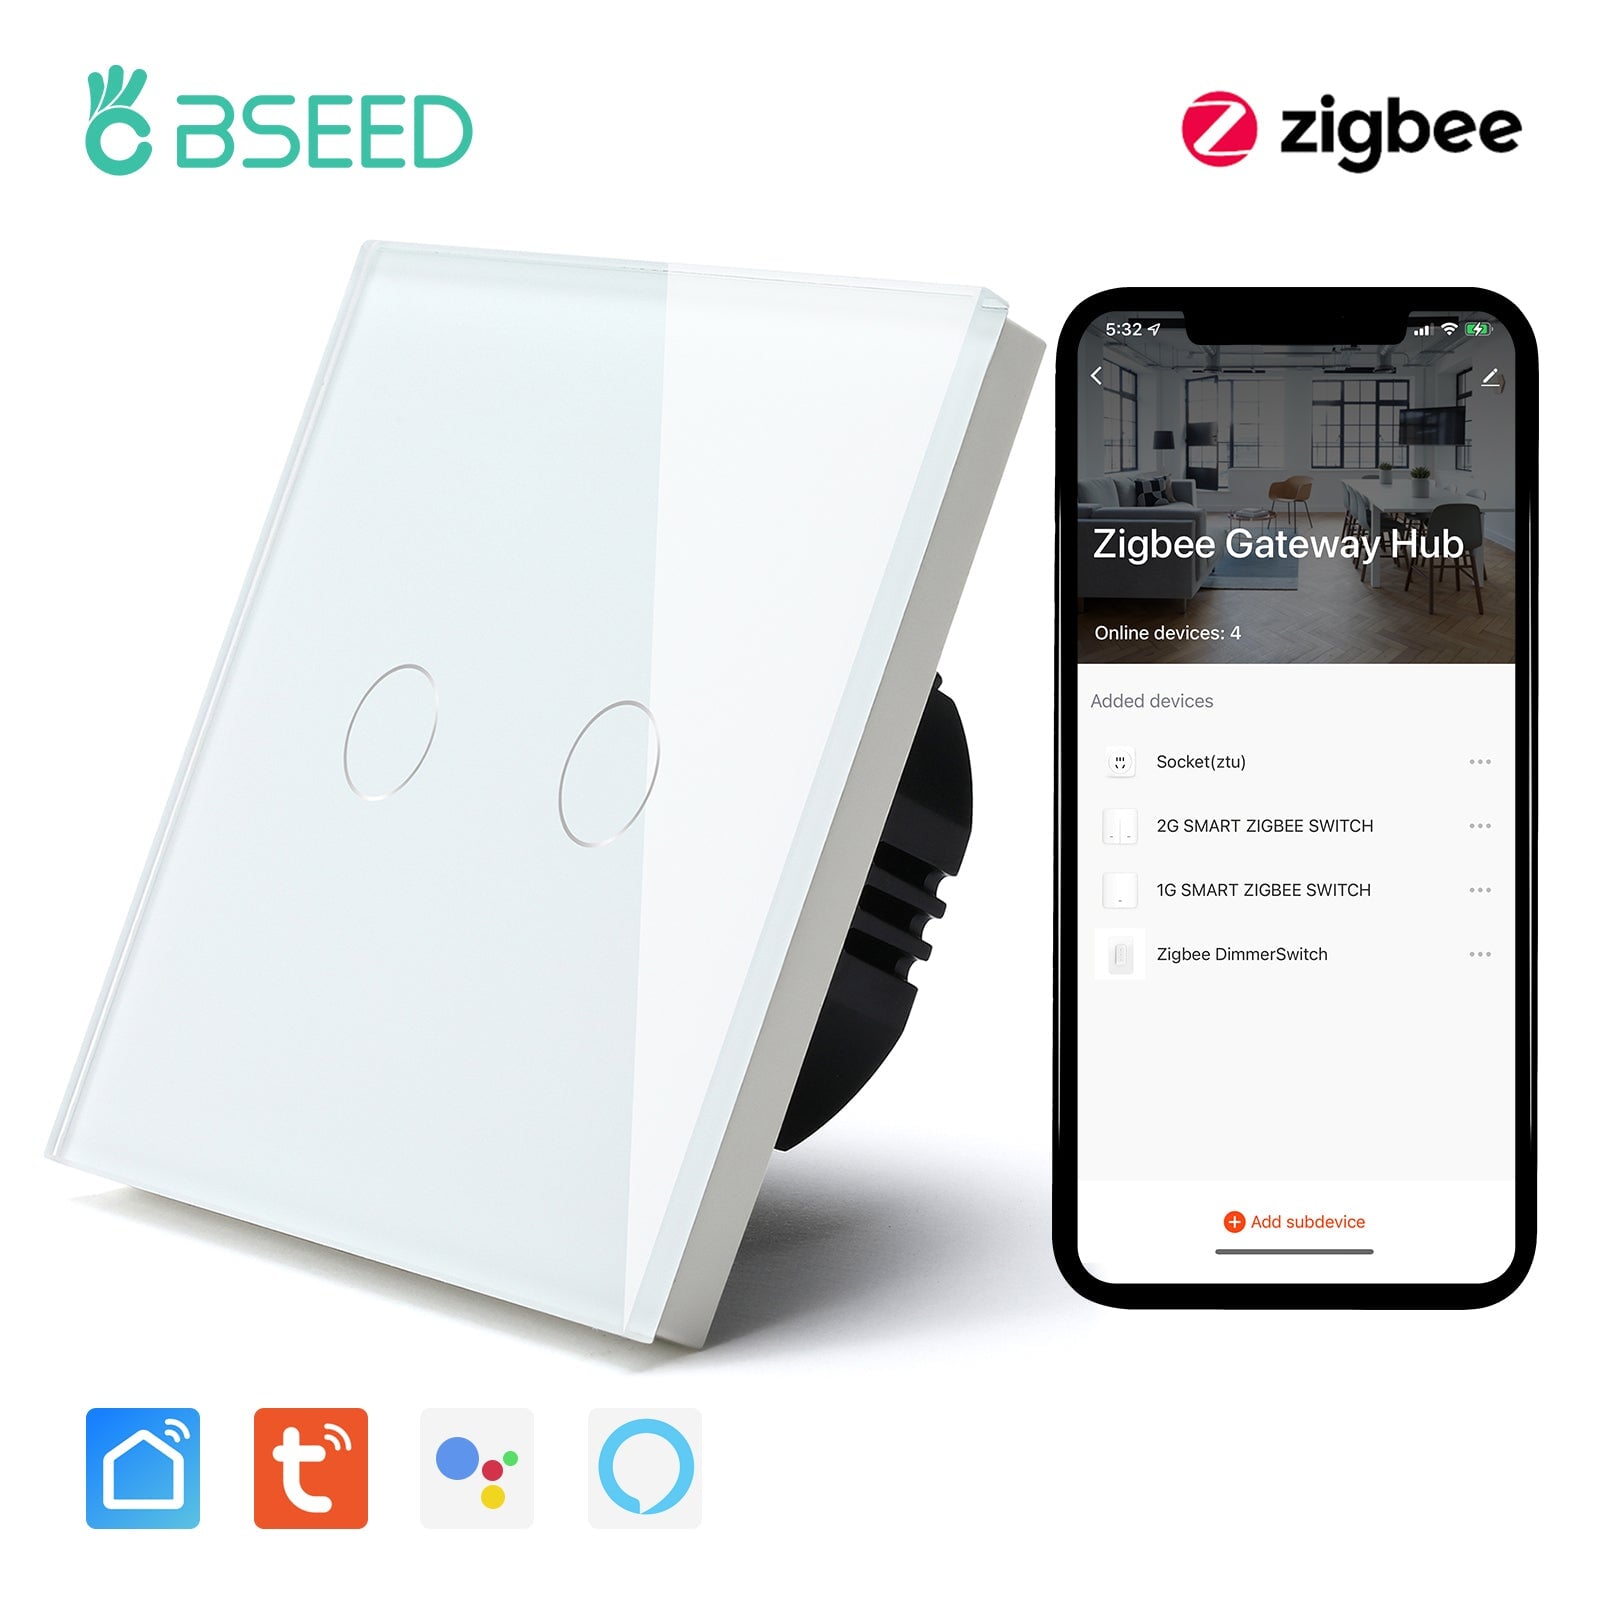 BSEED Zigbee Single Live Line Switch 1/2/3 Gang 1/2/3 Way Wall Smart Light Switch Single Live Line 1/2/3 pack Light Switches Bseedswitch White 2Gang 1 Pcs/Pack